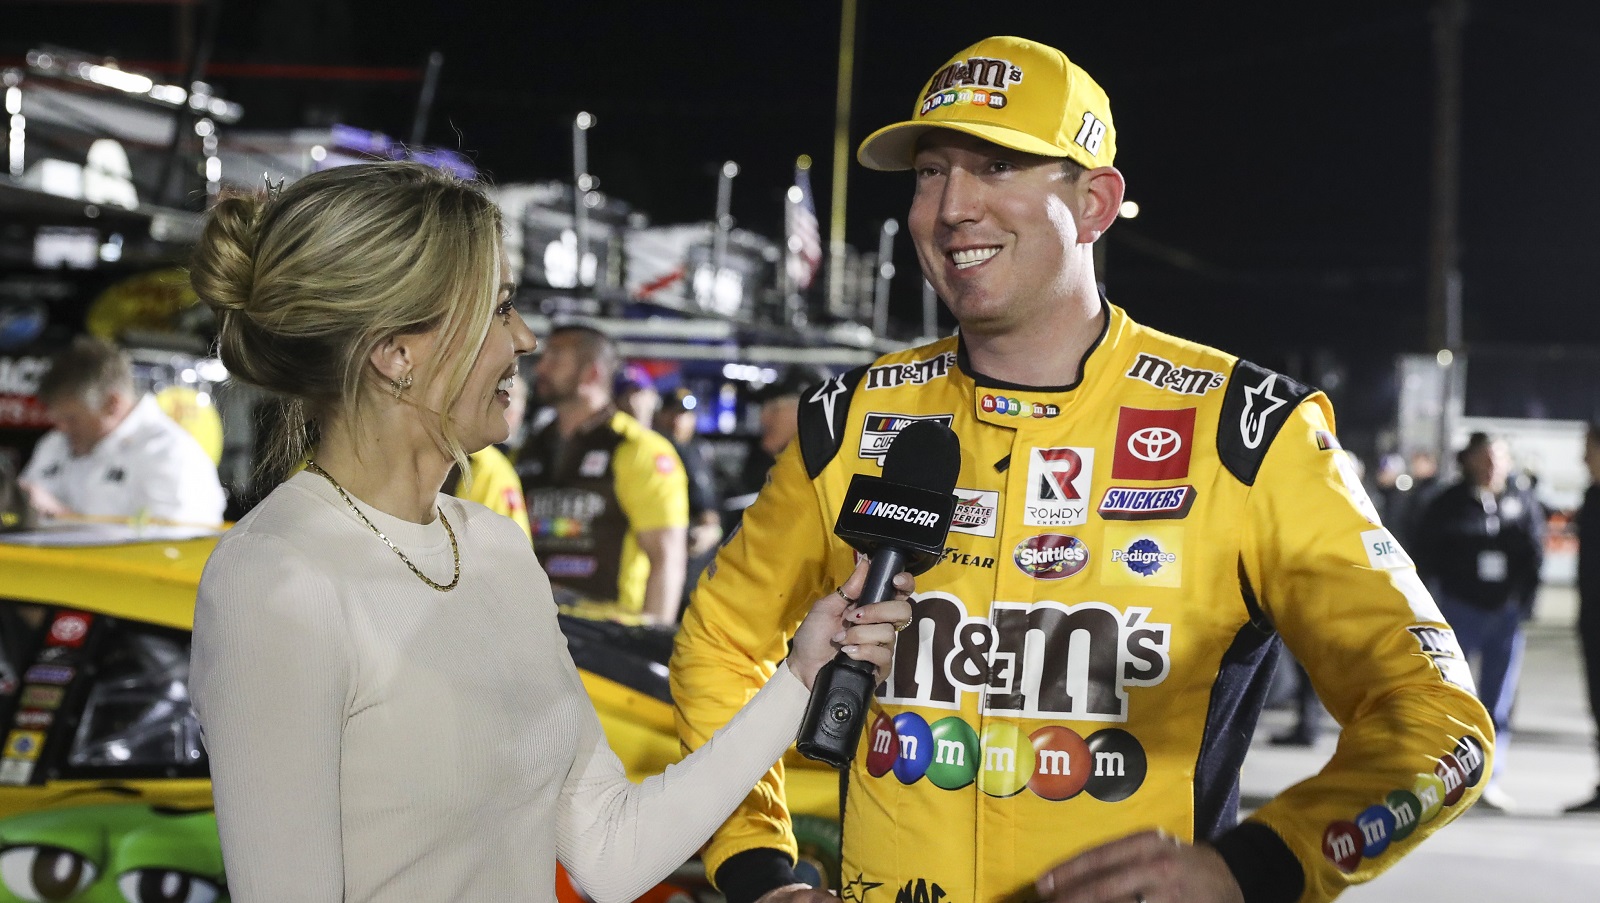 Kyle Busch, driver of the No. 18 Toyota, speaks with a reporter following qualifying for the NASCAR Cup Series Busch Light Clash at Los Angeles Memorial Coliseum on Feb. 5, 2022.